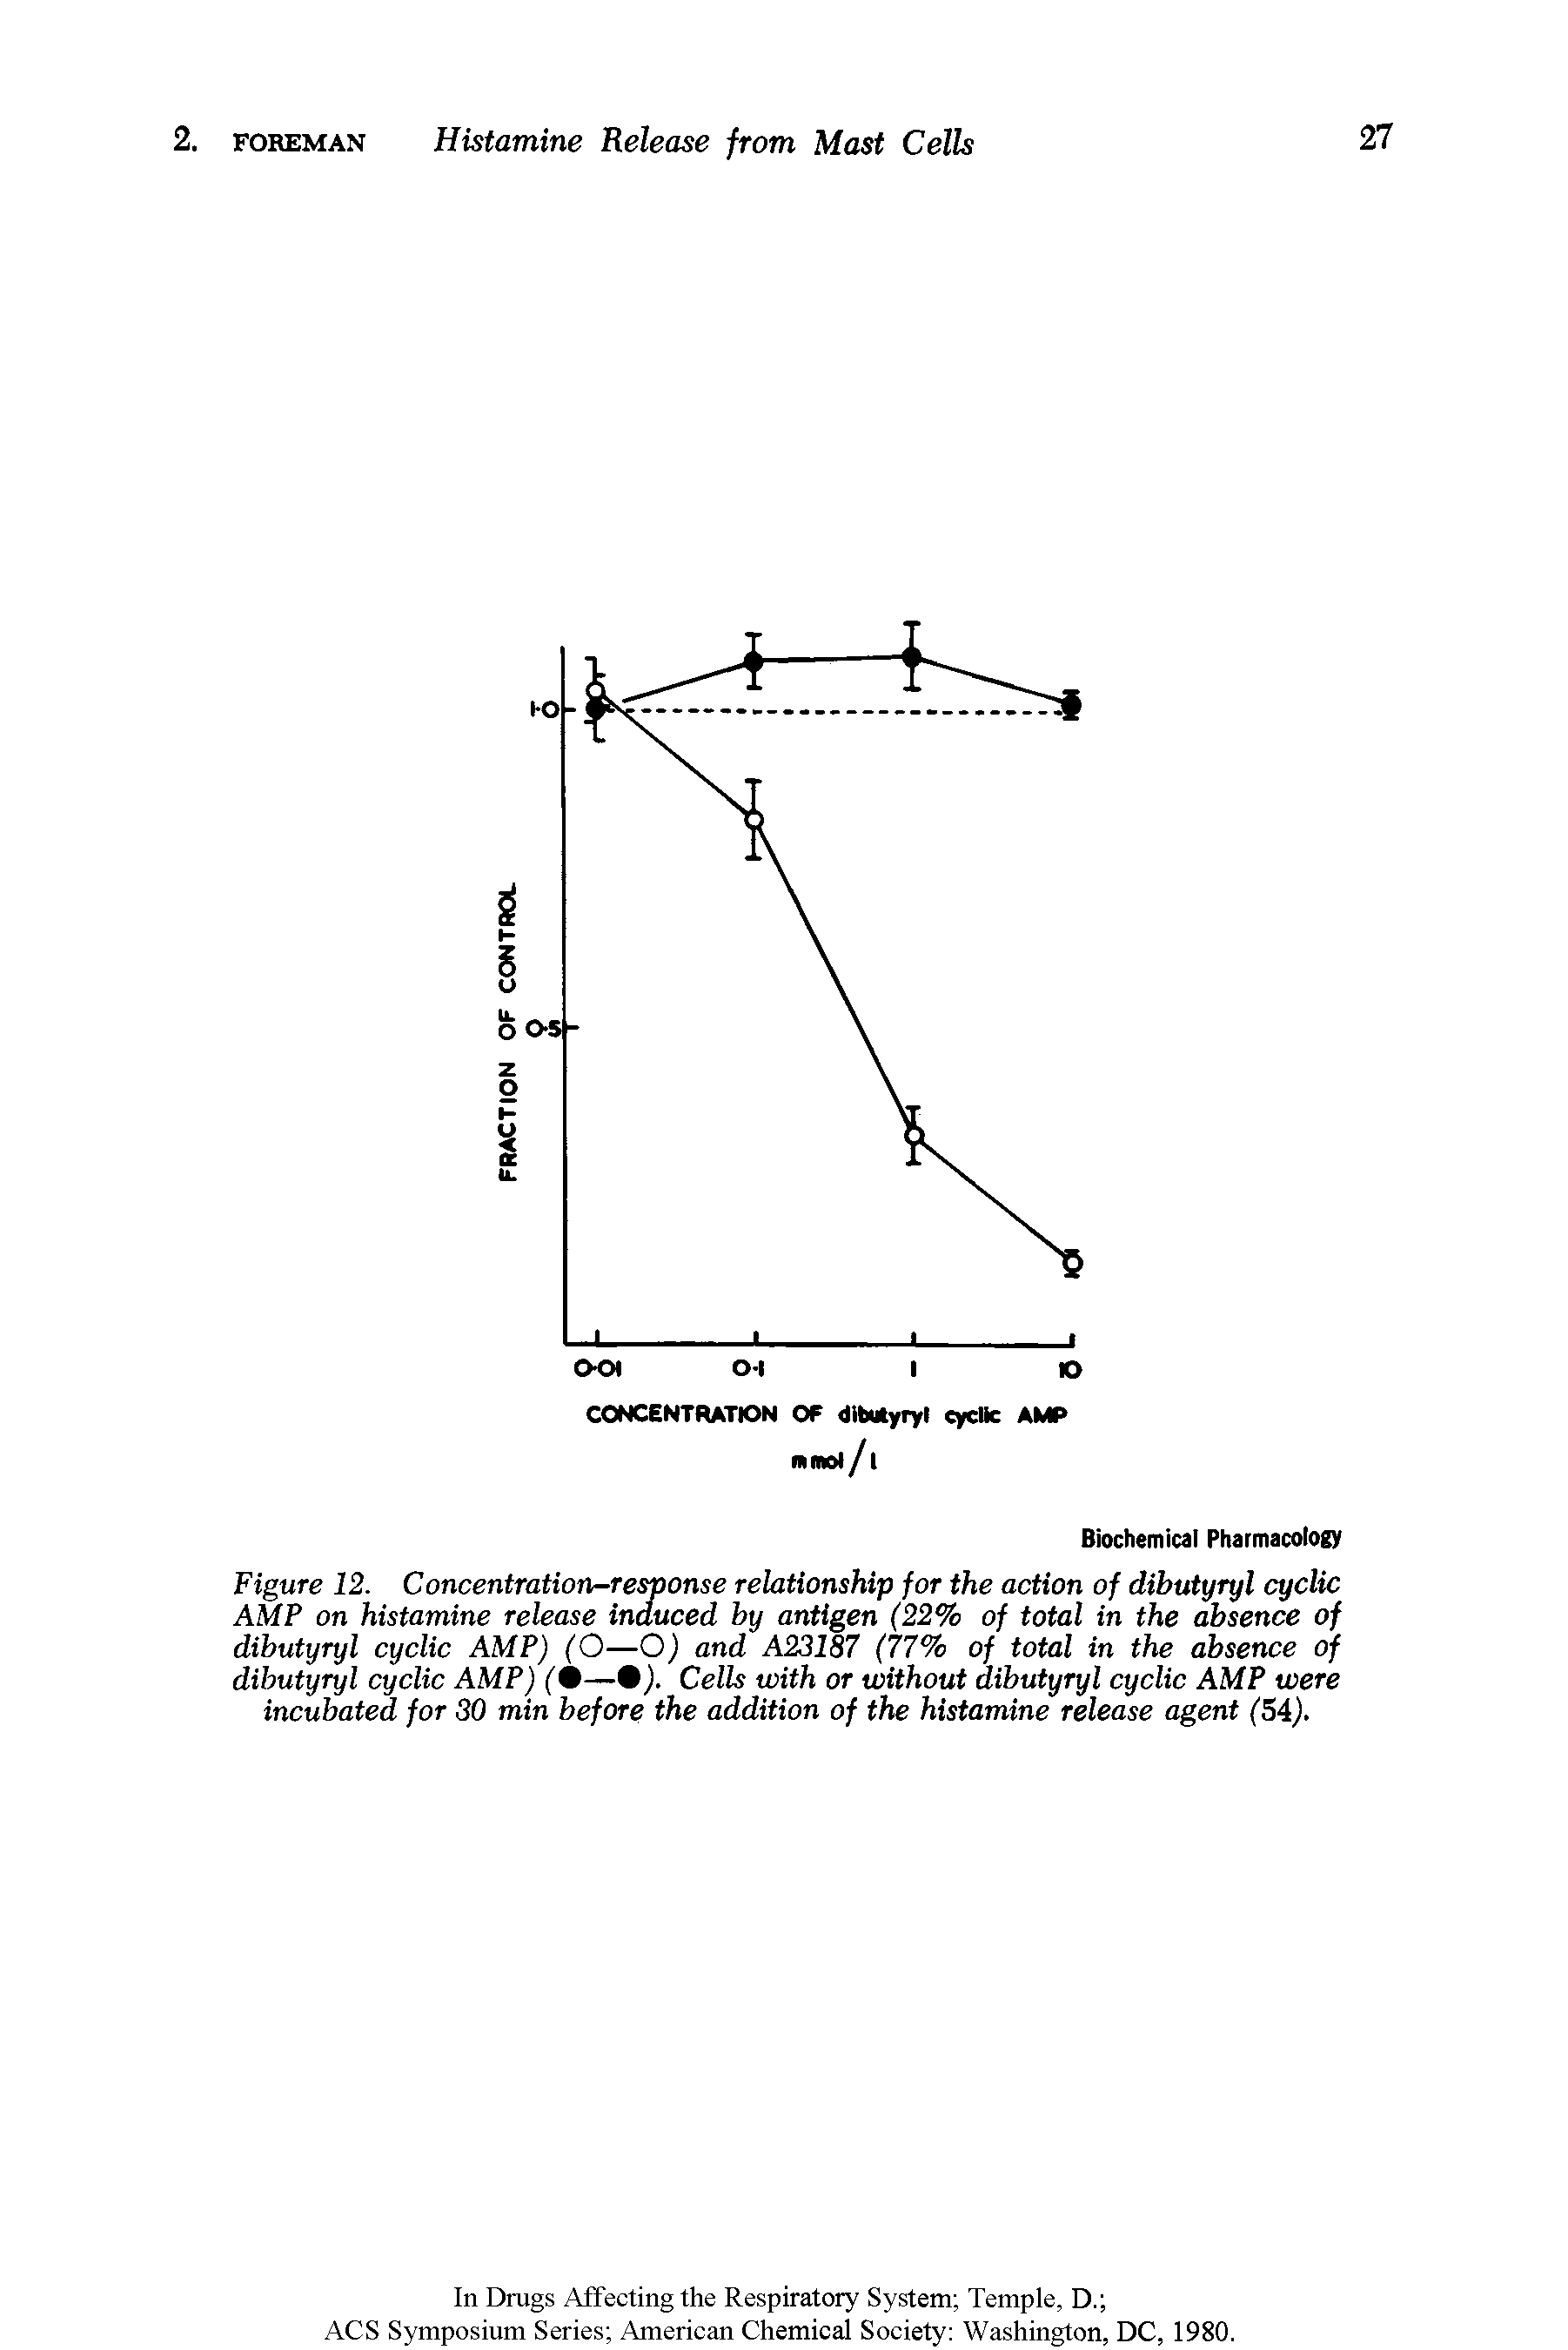 Figure 12. Concentration-response relationship for the action of dibutyryl cyclic AMP on histamine release induced by antigen (22% of total in the absence of dibutyryl cyclic AMP) (O—O) and A23187 (77% of total in the absence of dibutyryl cyclic AMP) (" —0). Cells with or without dibutyryl cyclic AMP were incubated for 30 min before the addition of the histamine release agent ( 54).